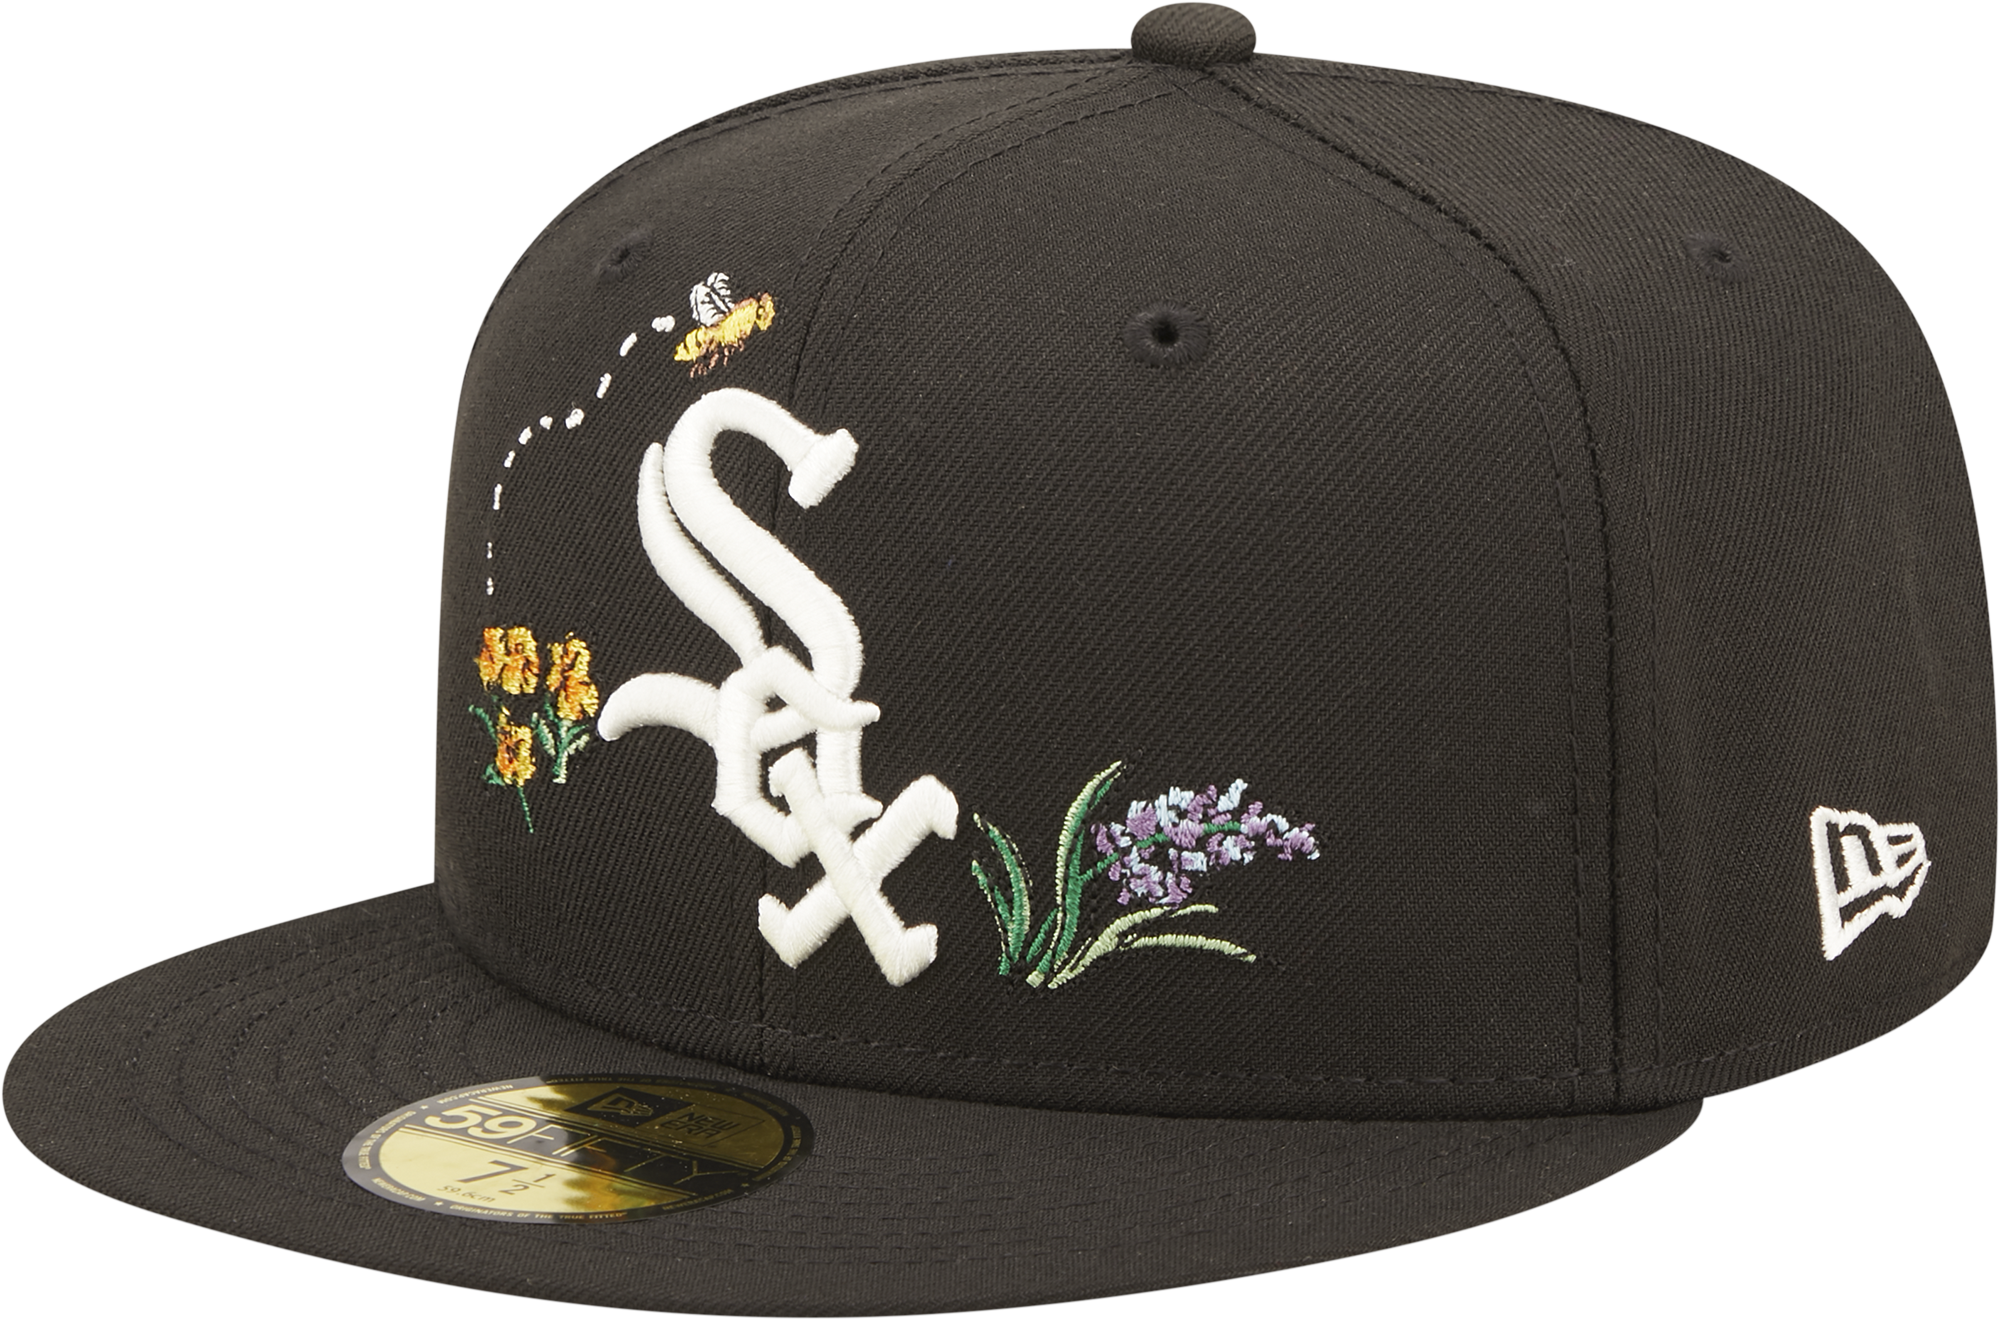 Chicago White Sox New Era MLB Basic Gray & Black 59FIFTY Fitted Hat 7